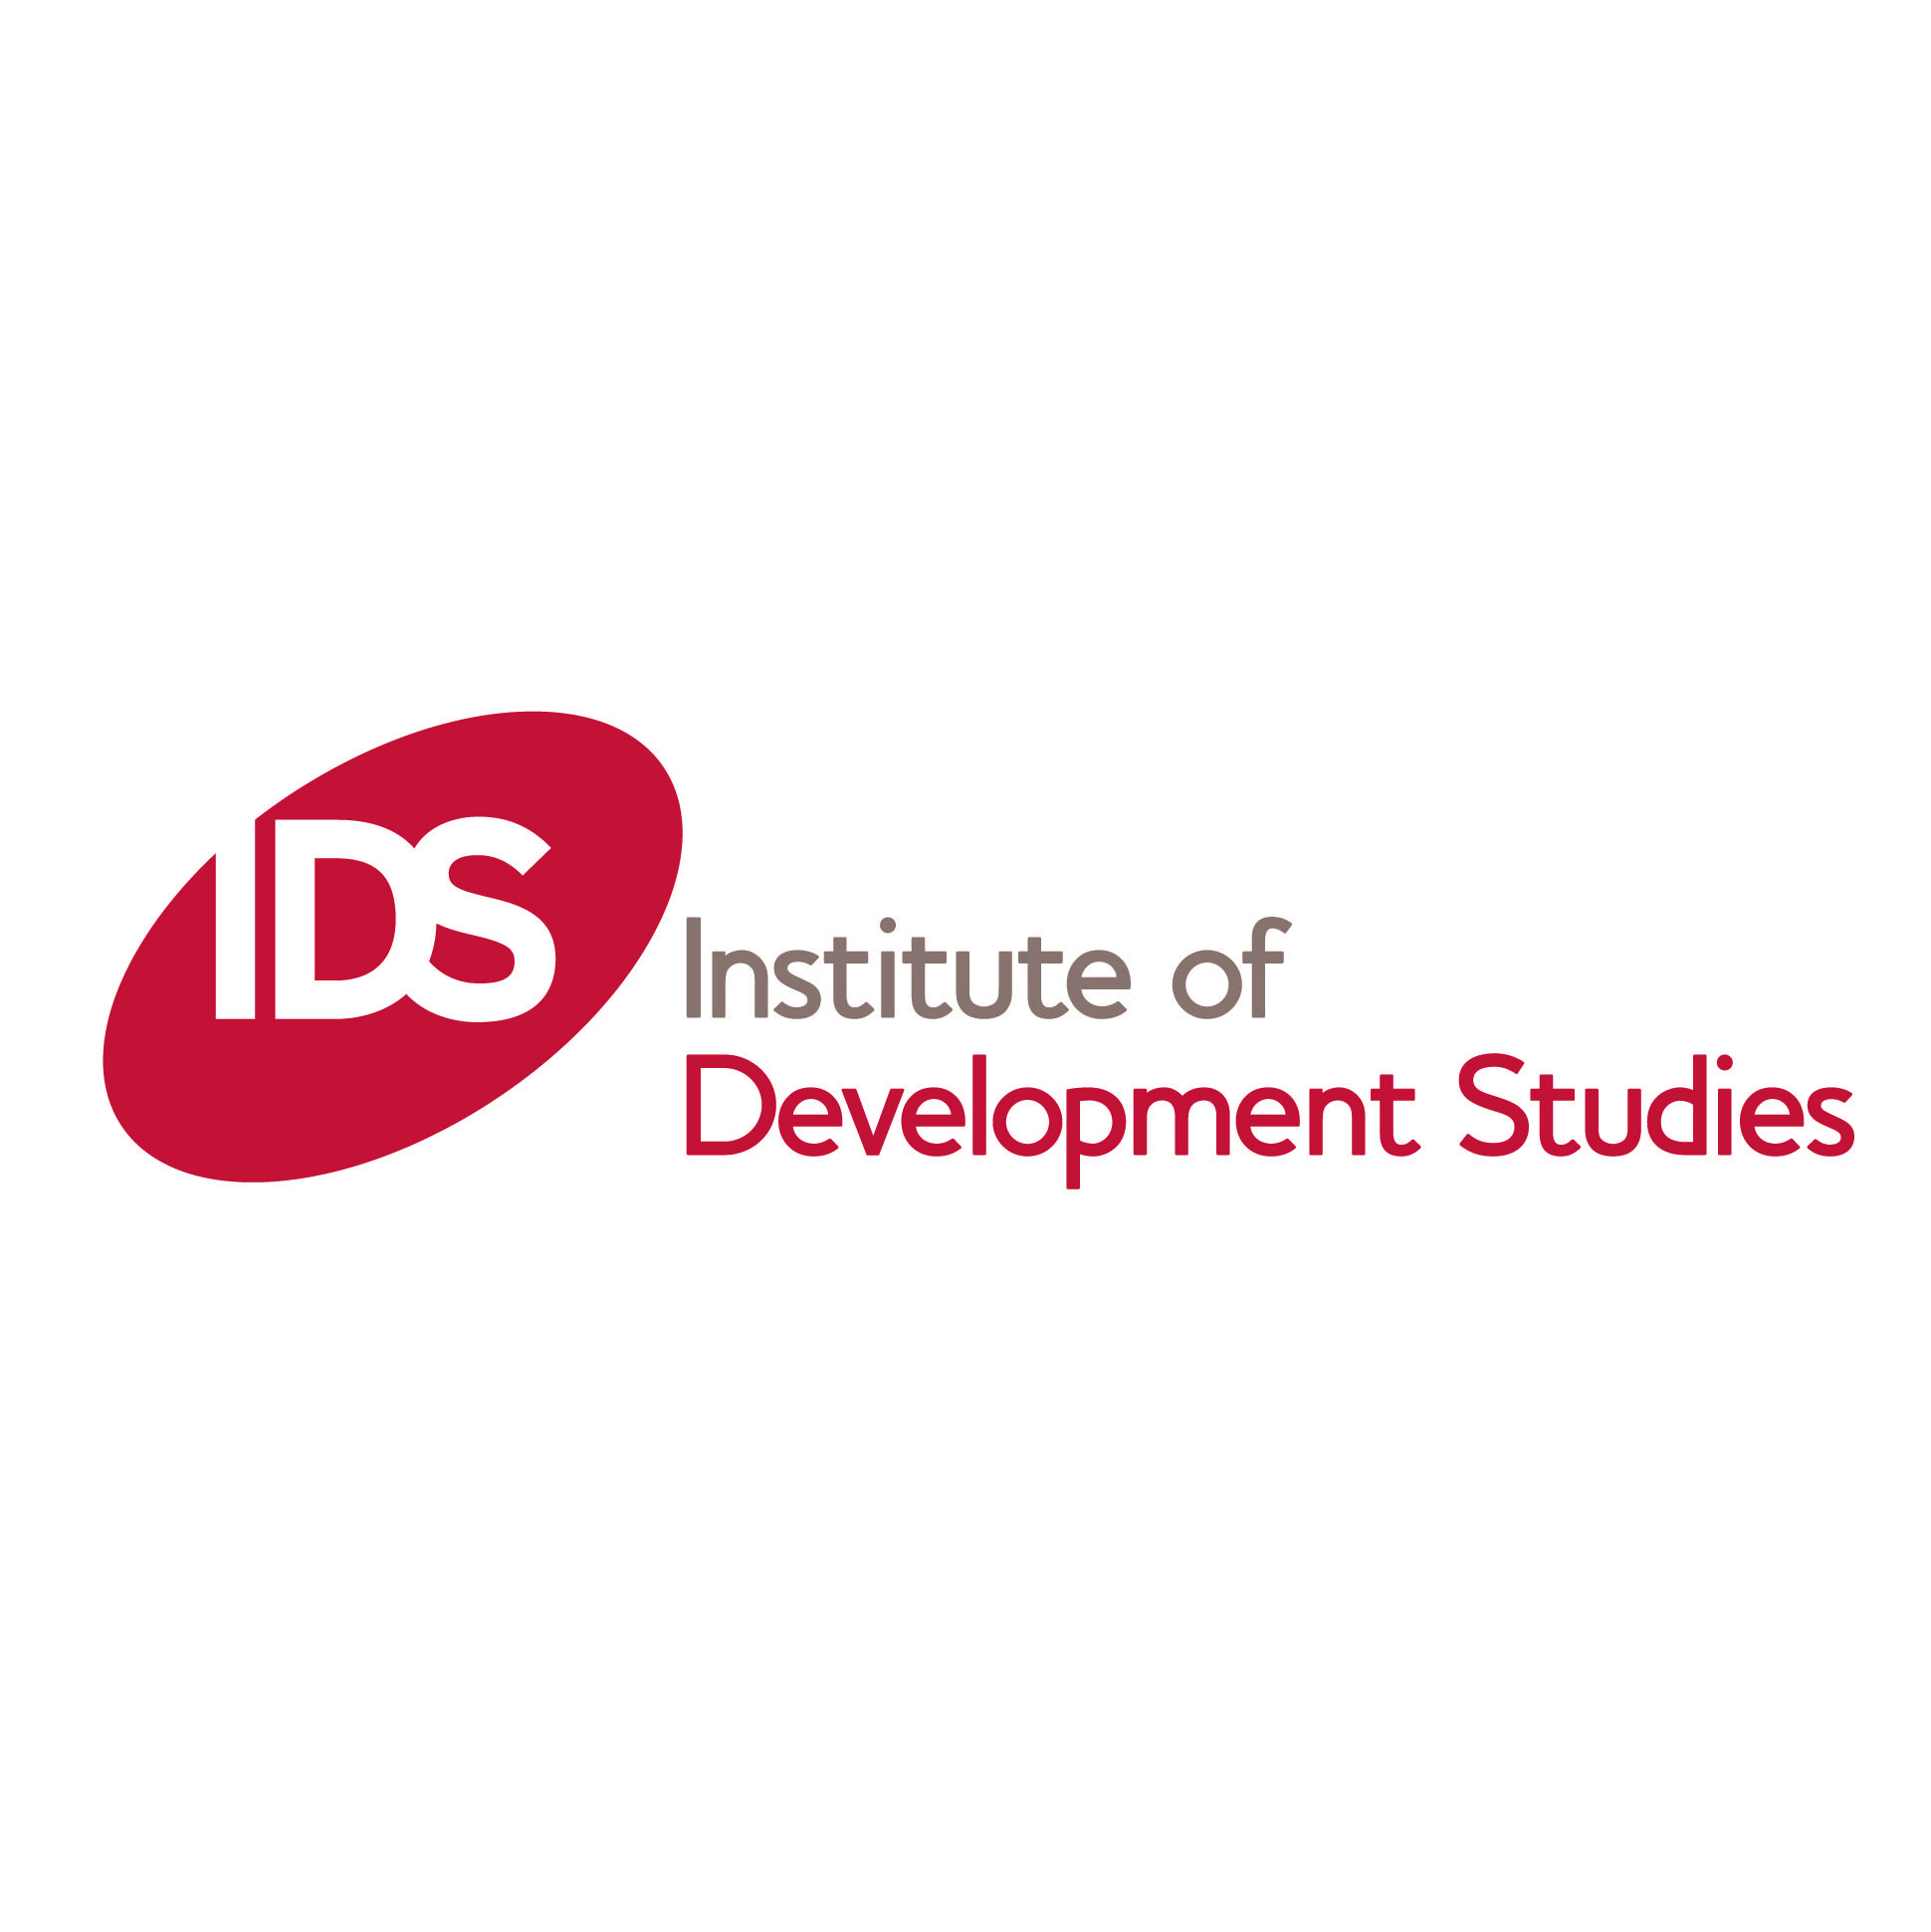  Knowledge, Evidence and Learning for Development (K4D) (ids.ac.uk)